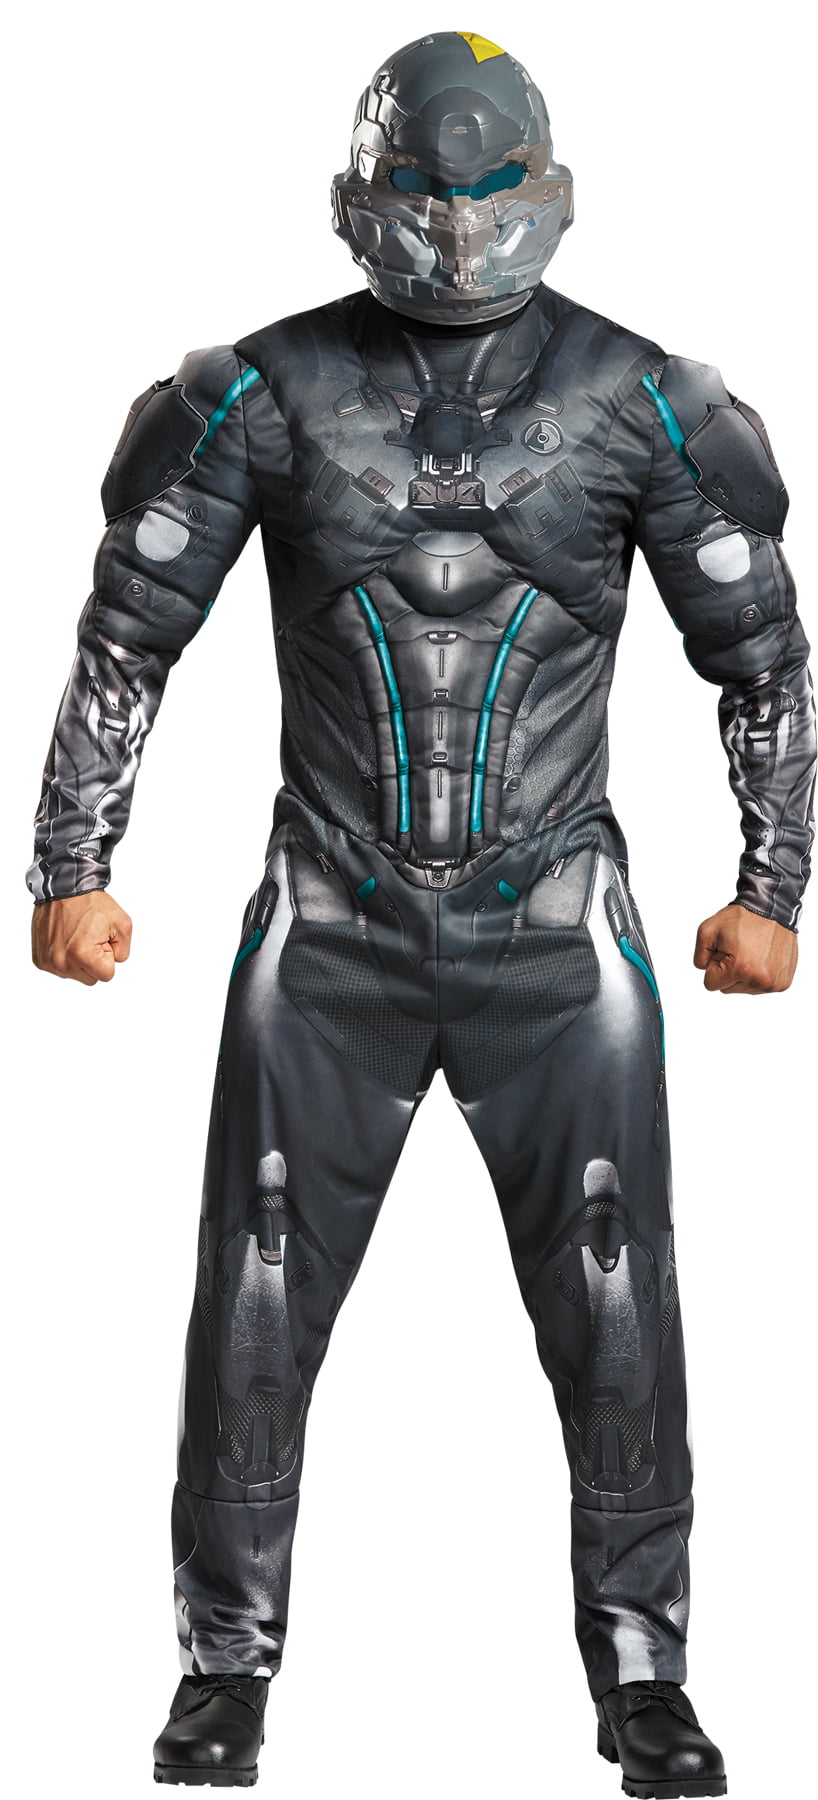 MENS HALO SPARTAN LOCKE COSTUME DELUXE MUSCLE CHEST ADULT COSPLAY FANCY DRESS 